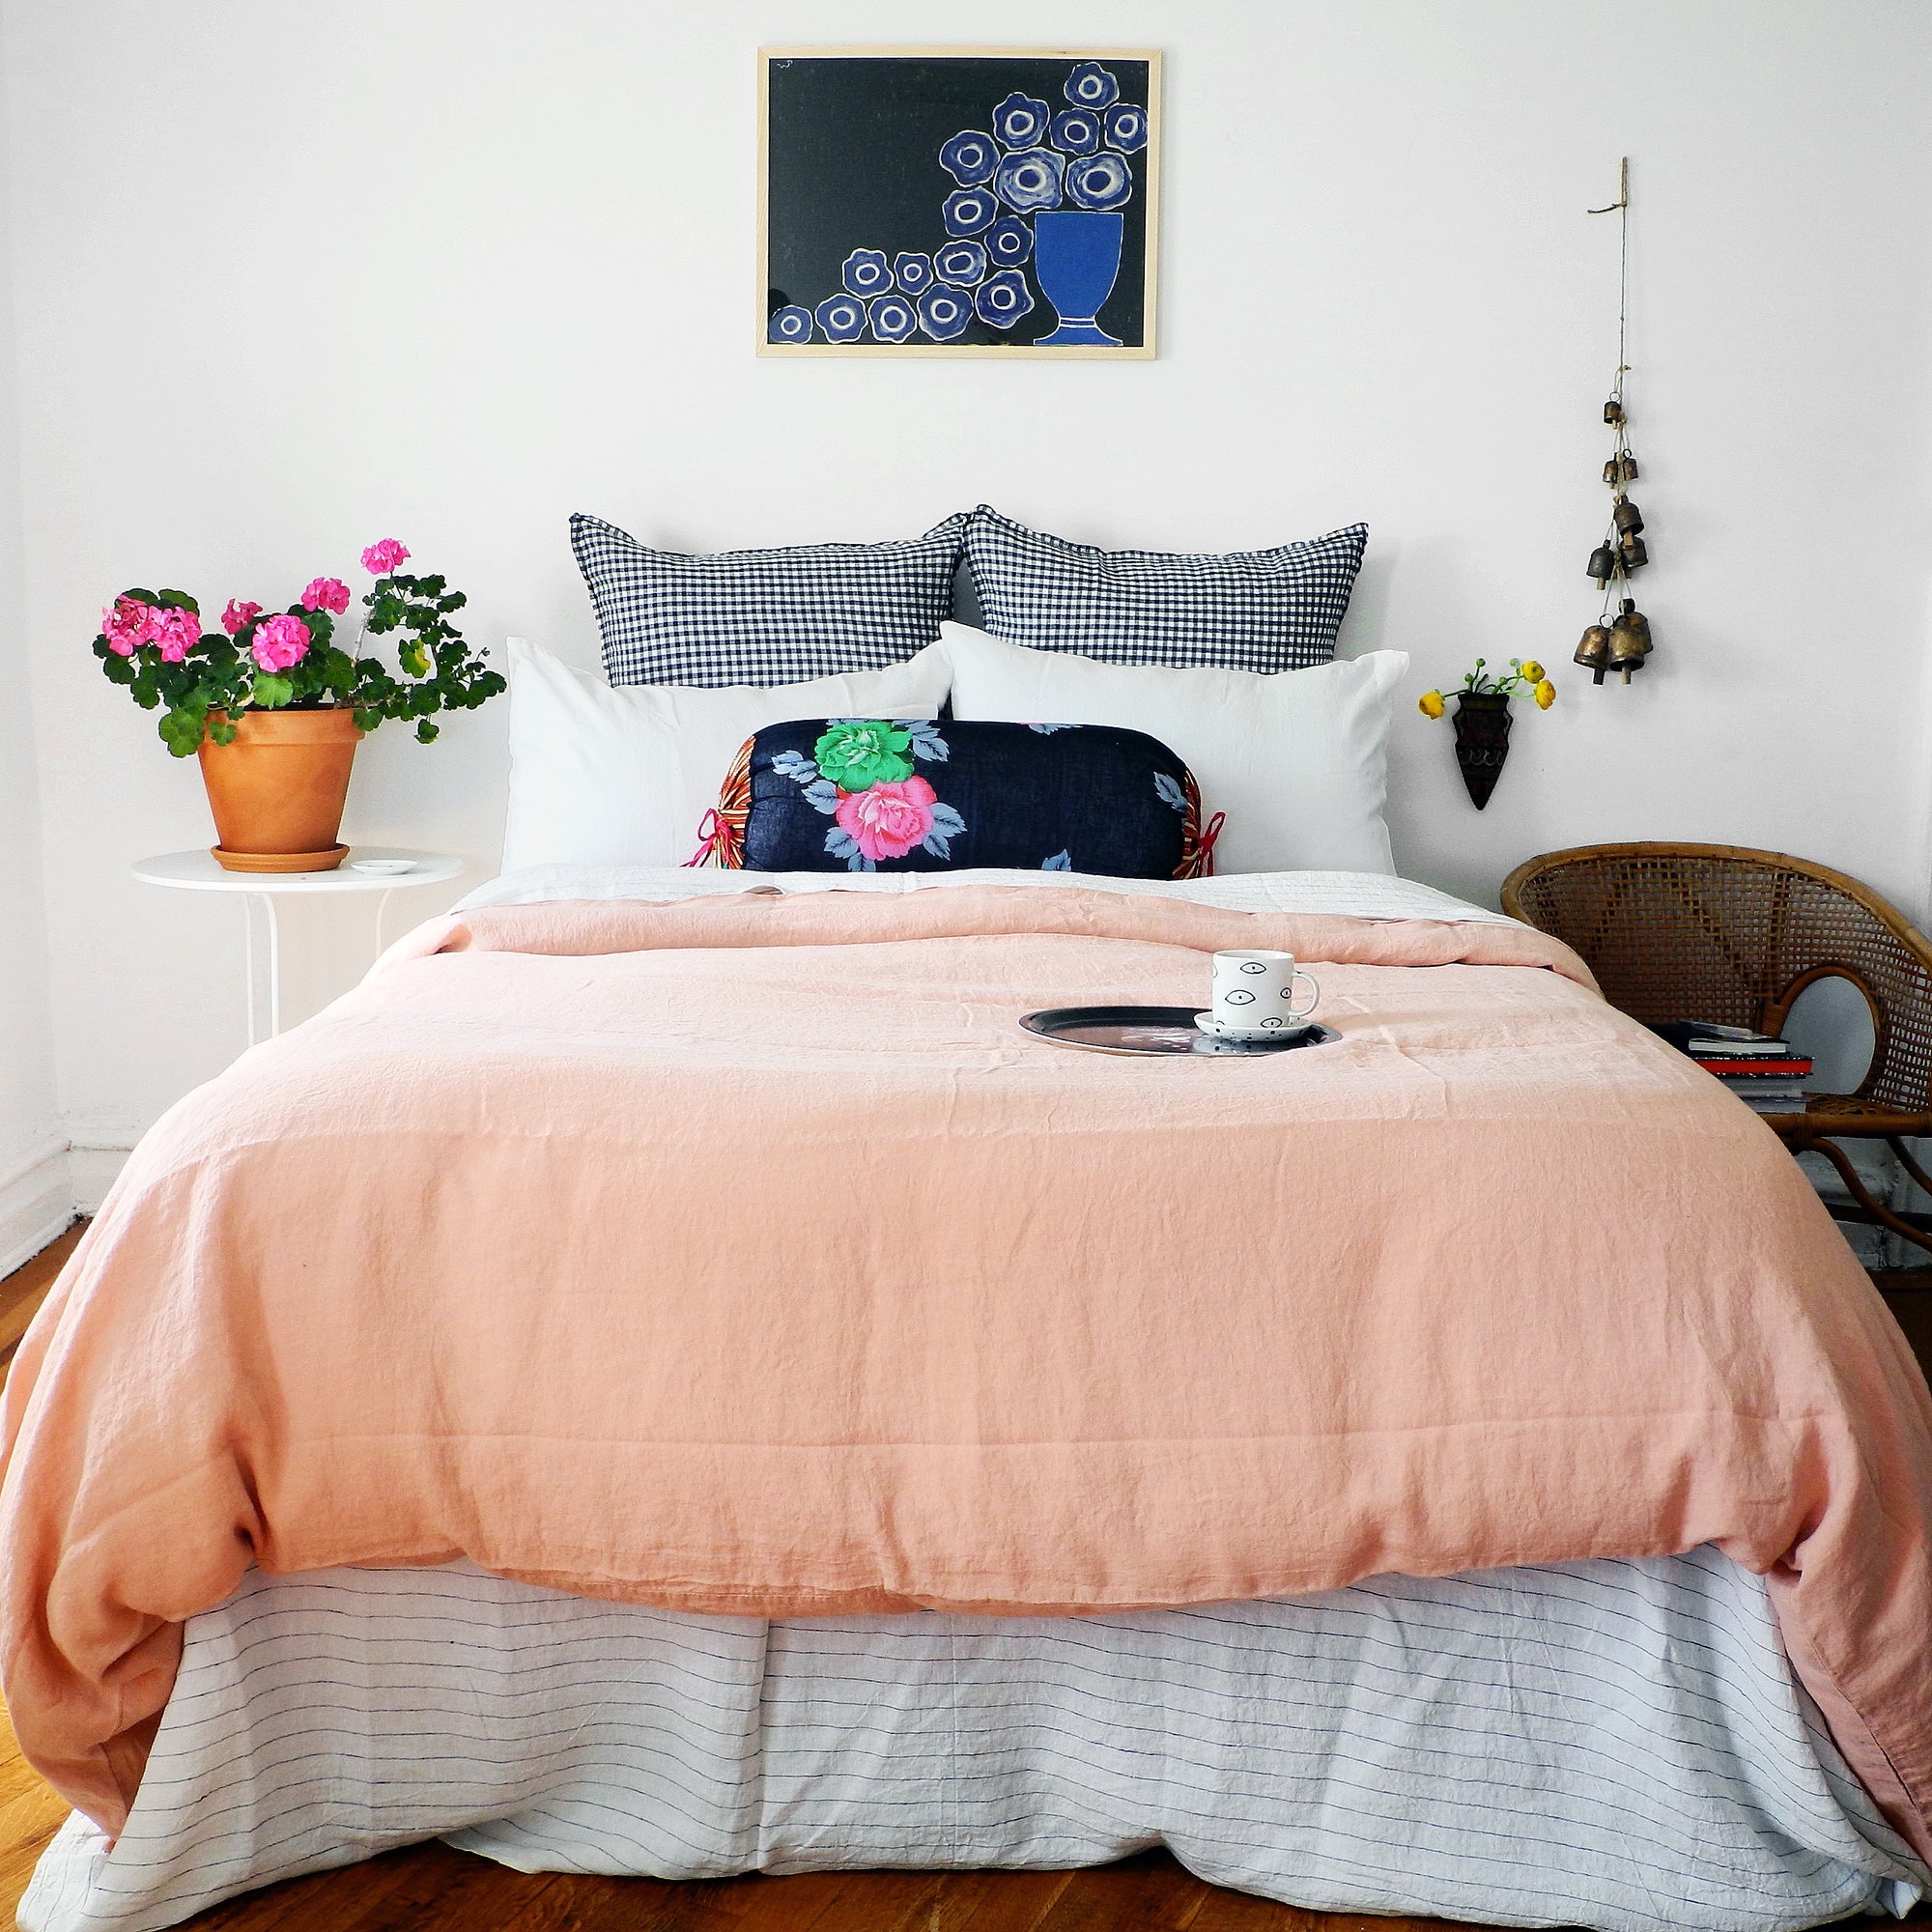 A Linge Particulier Linen Duvet in Copper gives a salmon and pink color to this duvet for a colorful linen bedding look from Collyer's Mansion